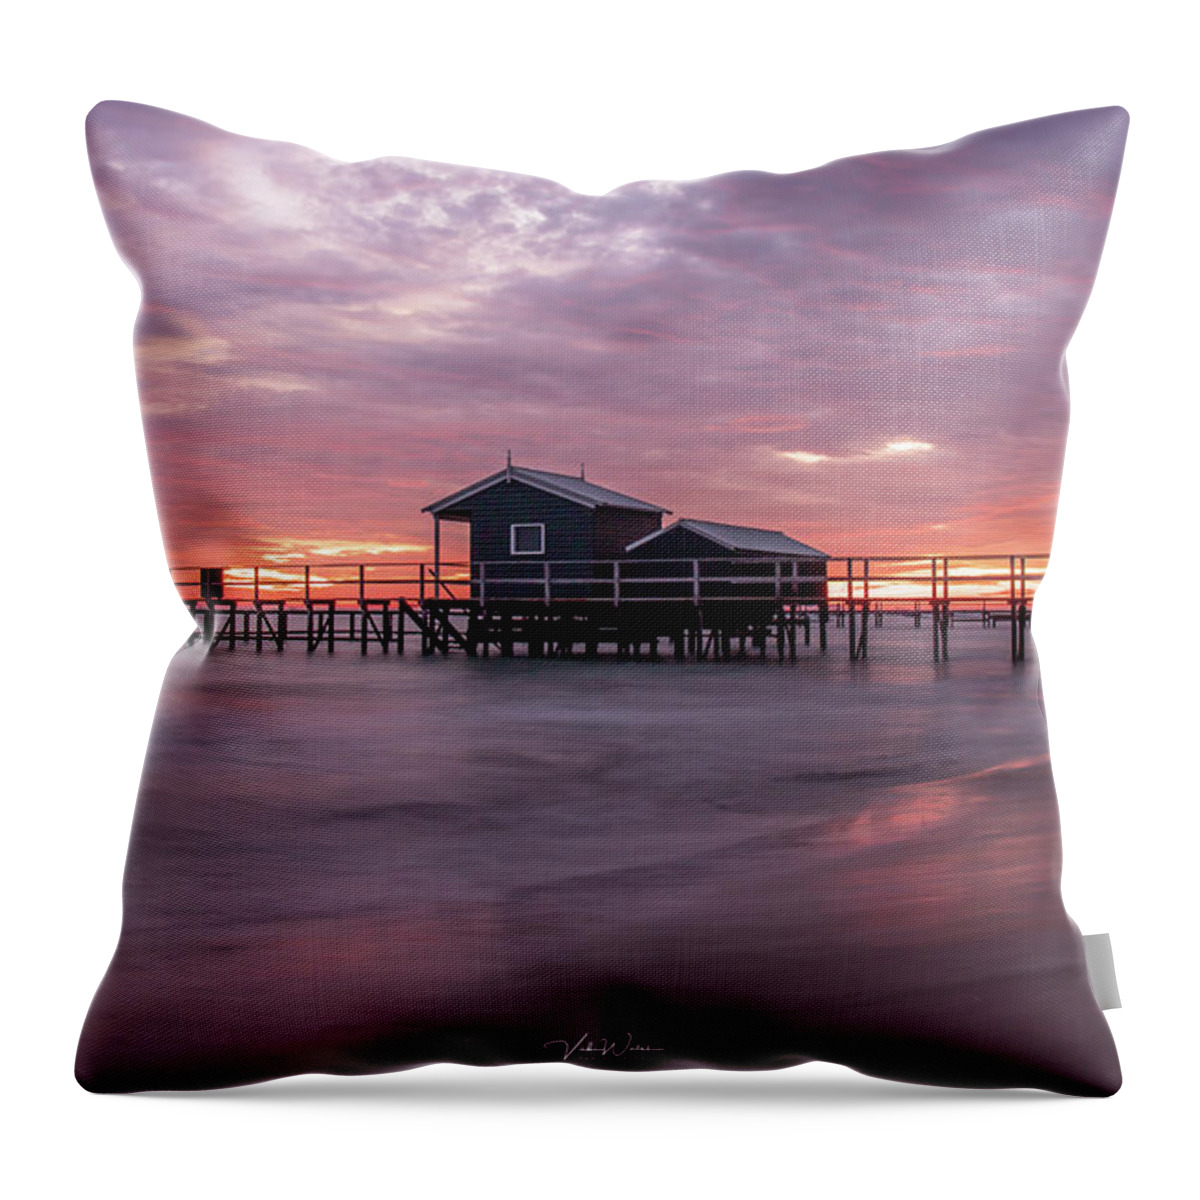 The Shelley Beach Jetty Throw Pillow featuring the photograph Shelley Beach Jetty 2 by Vicki Walsh